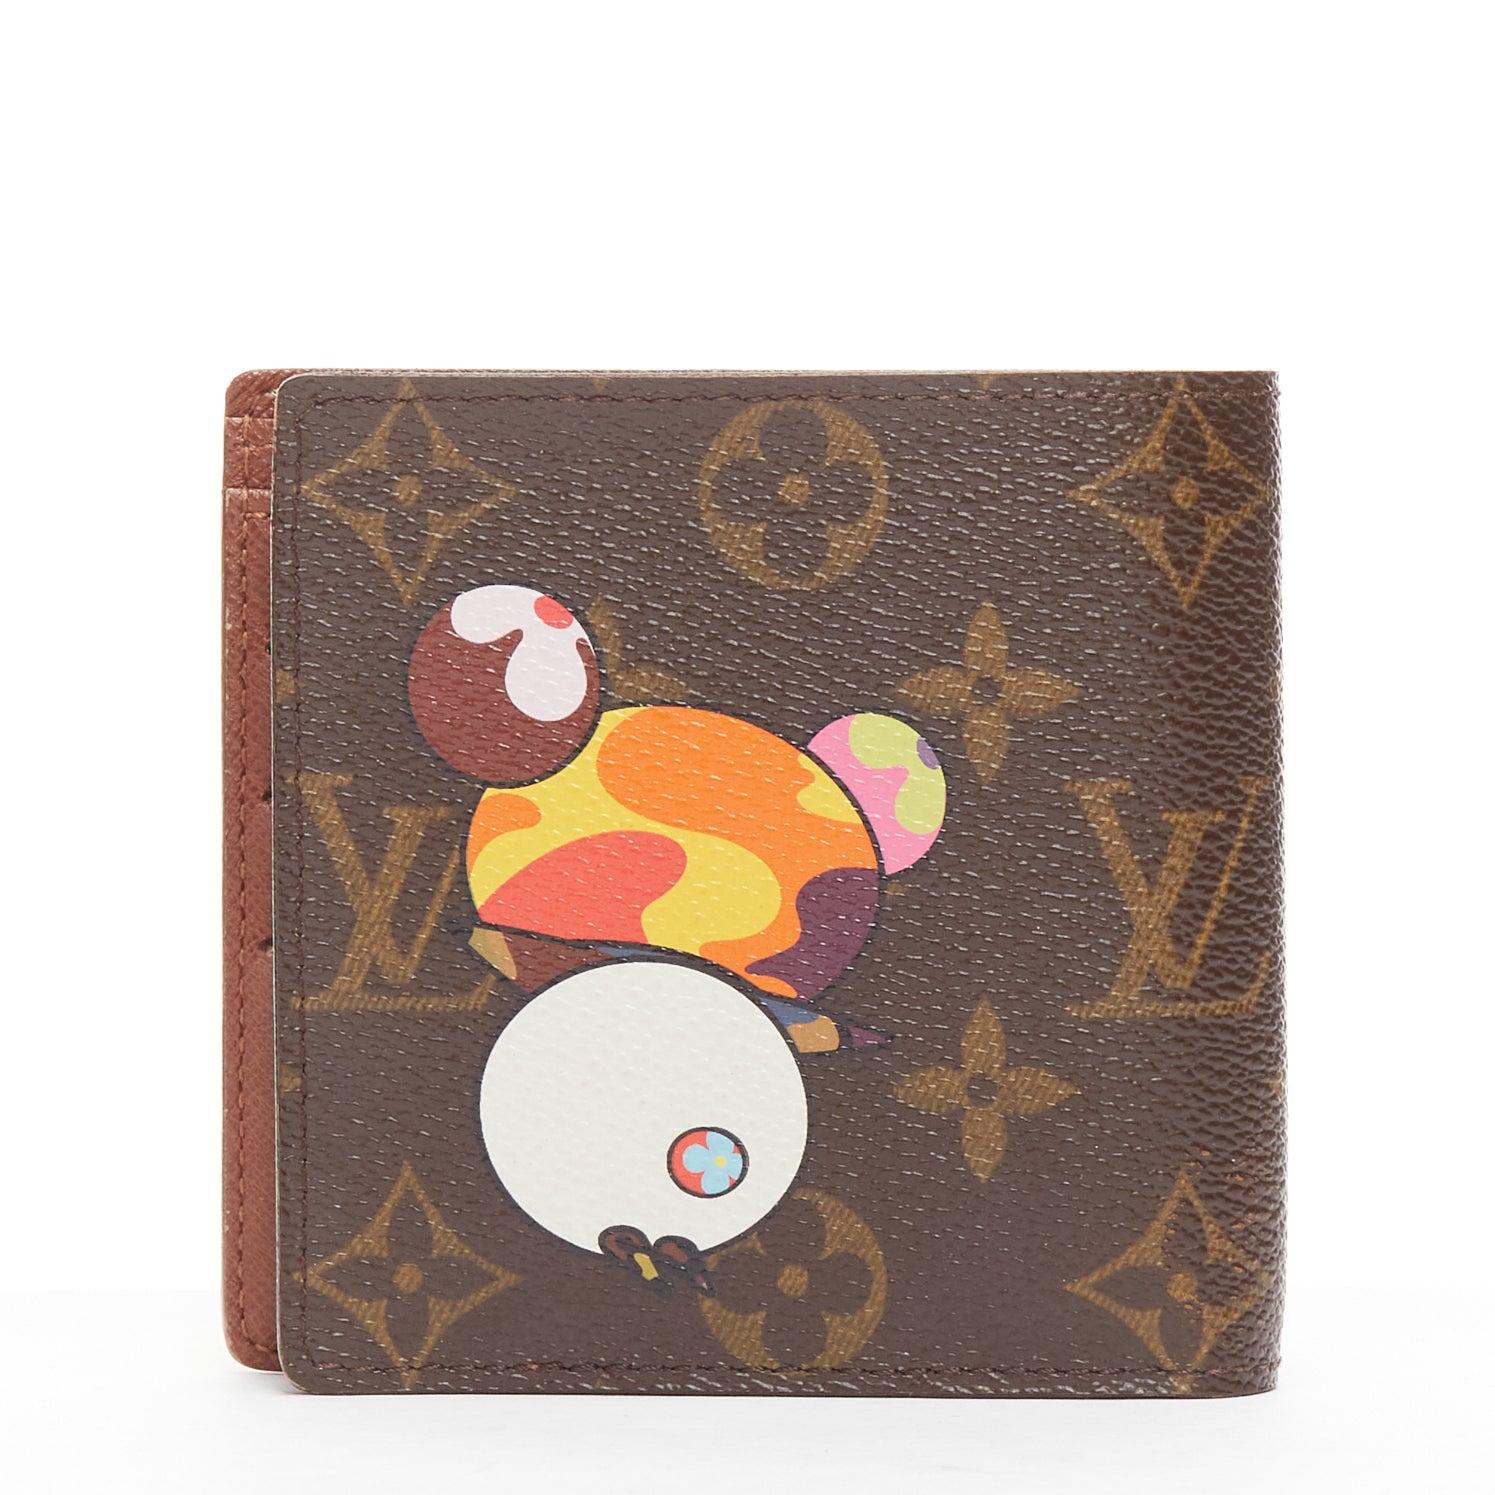 rare LOUIS VUITTON Takashi Murakami bear LV monogram bifold wallet
Reference: AAWC/A00981
Brand: Louis Vuitton
Collection: Takashi Murakami
Material: Canvas, Leather
Color: Brown, Multicolour
Pattern: Monogram
Lining: Brown Leather
Extra Details: